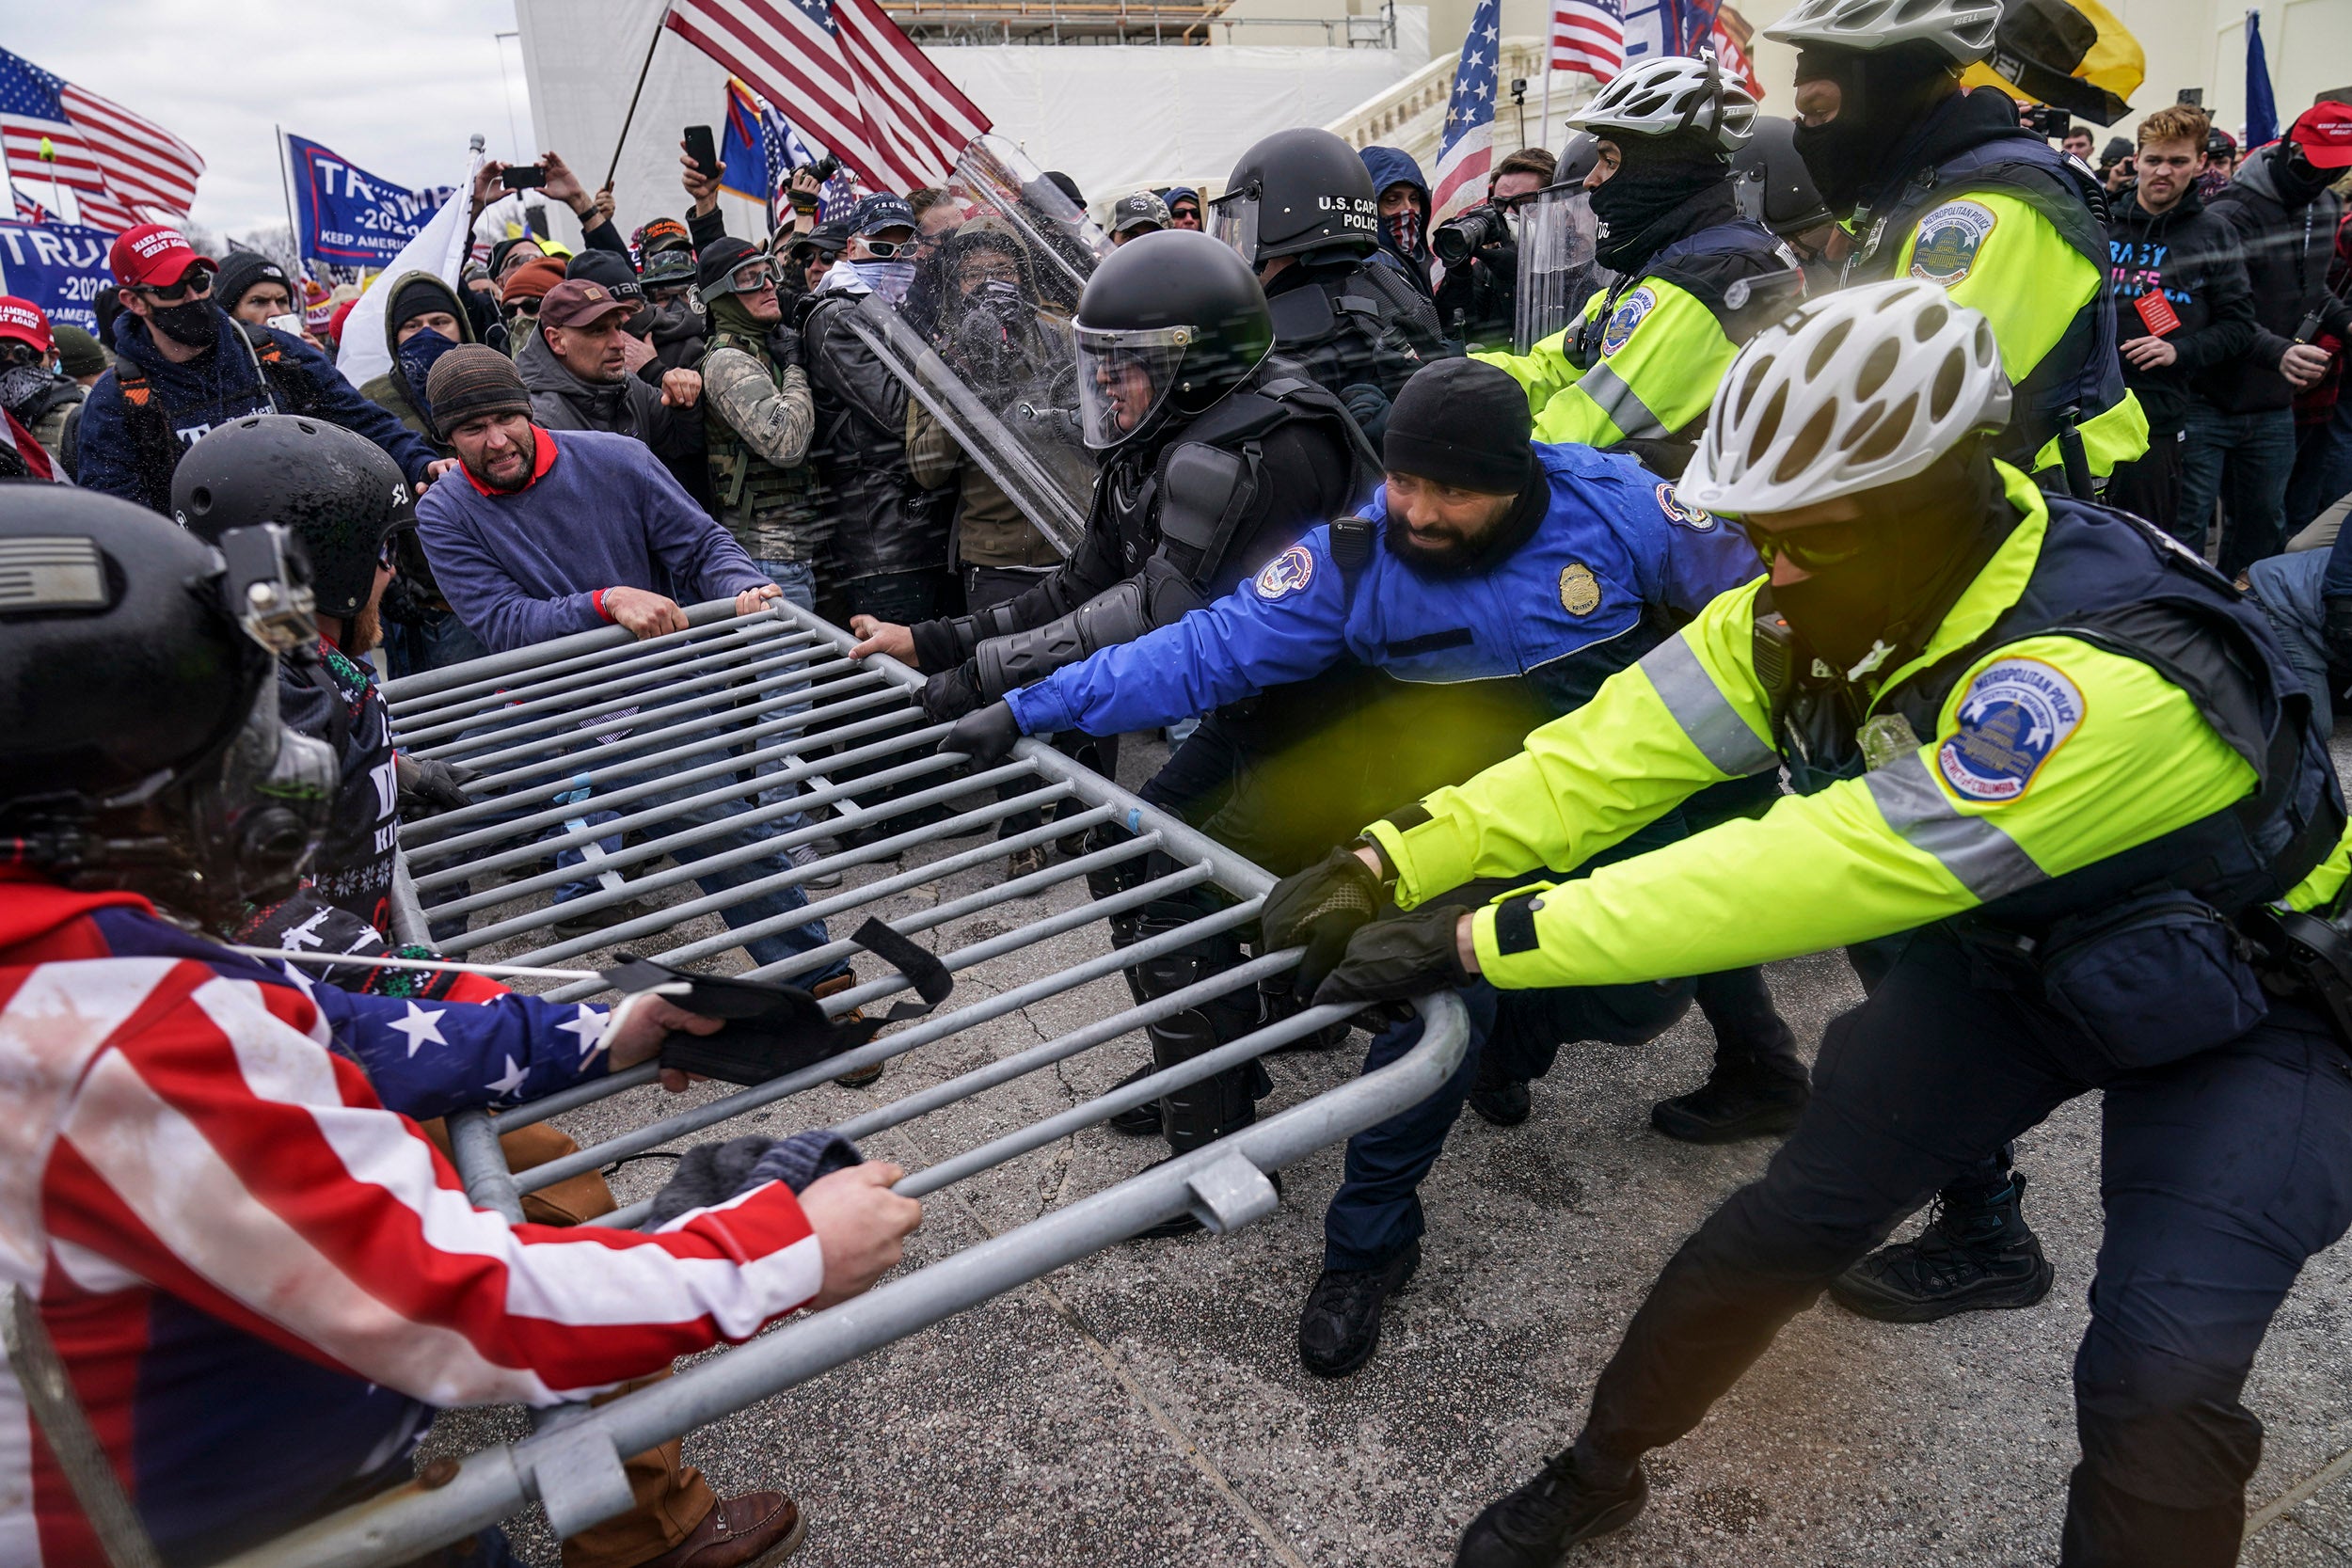 People try to break through barrier at Capitol on Jan. 6, 2021.